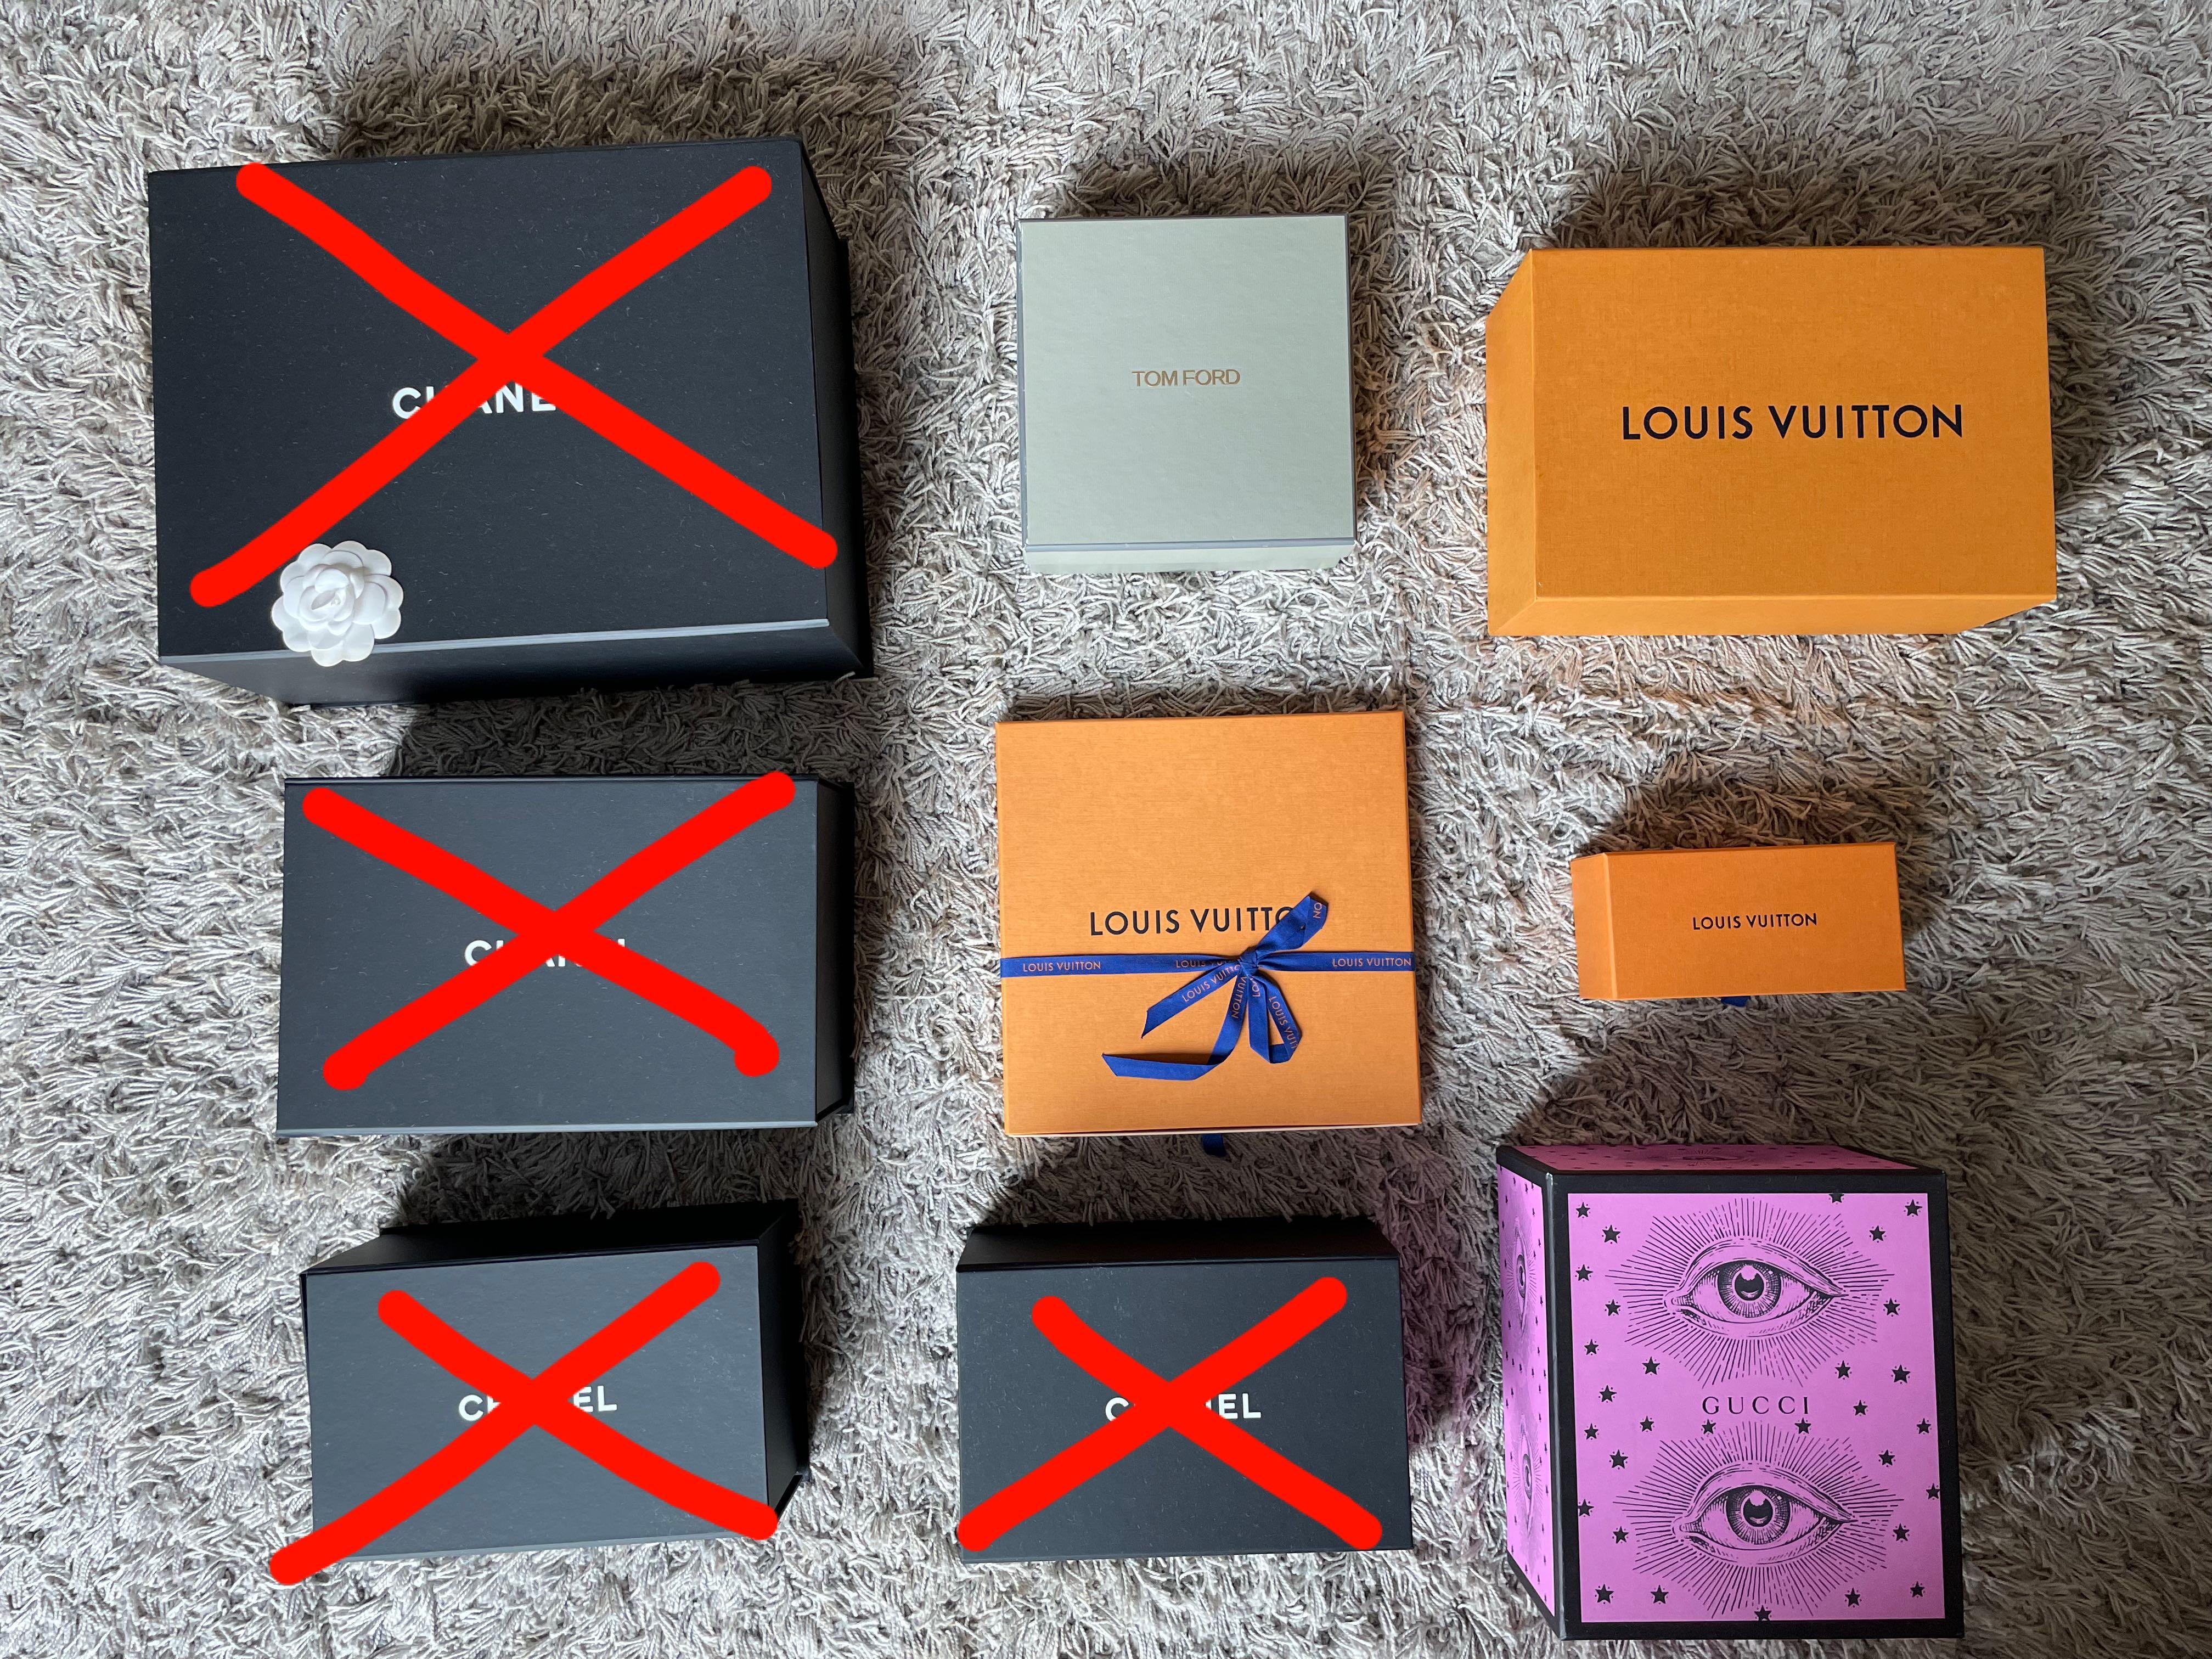 Authentic Luxury Designer Boxes - Chanel, LV, Gucci, Tom Ford, Luxury, Bags  & Wallets on Carousell